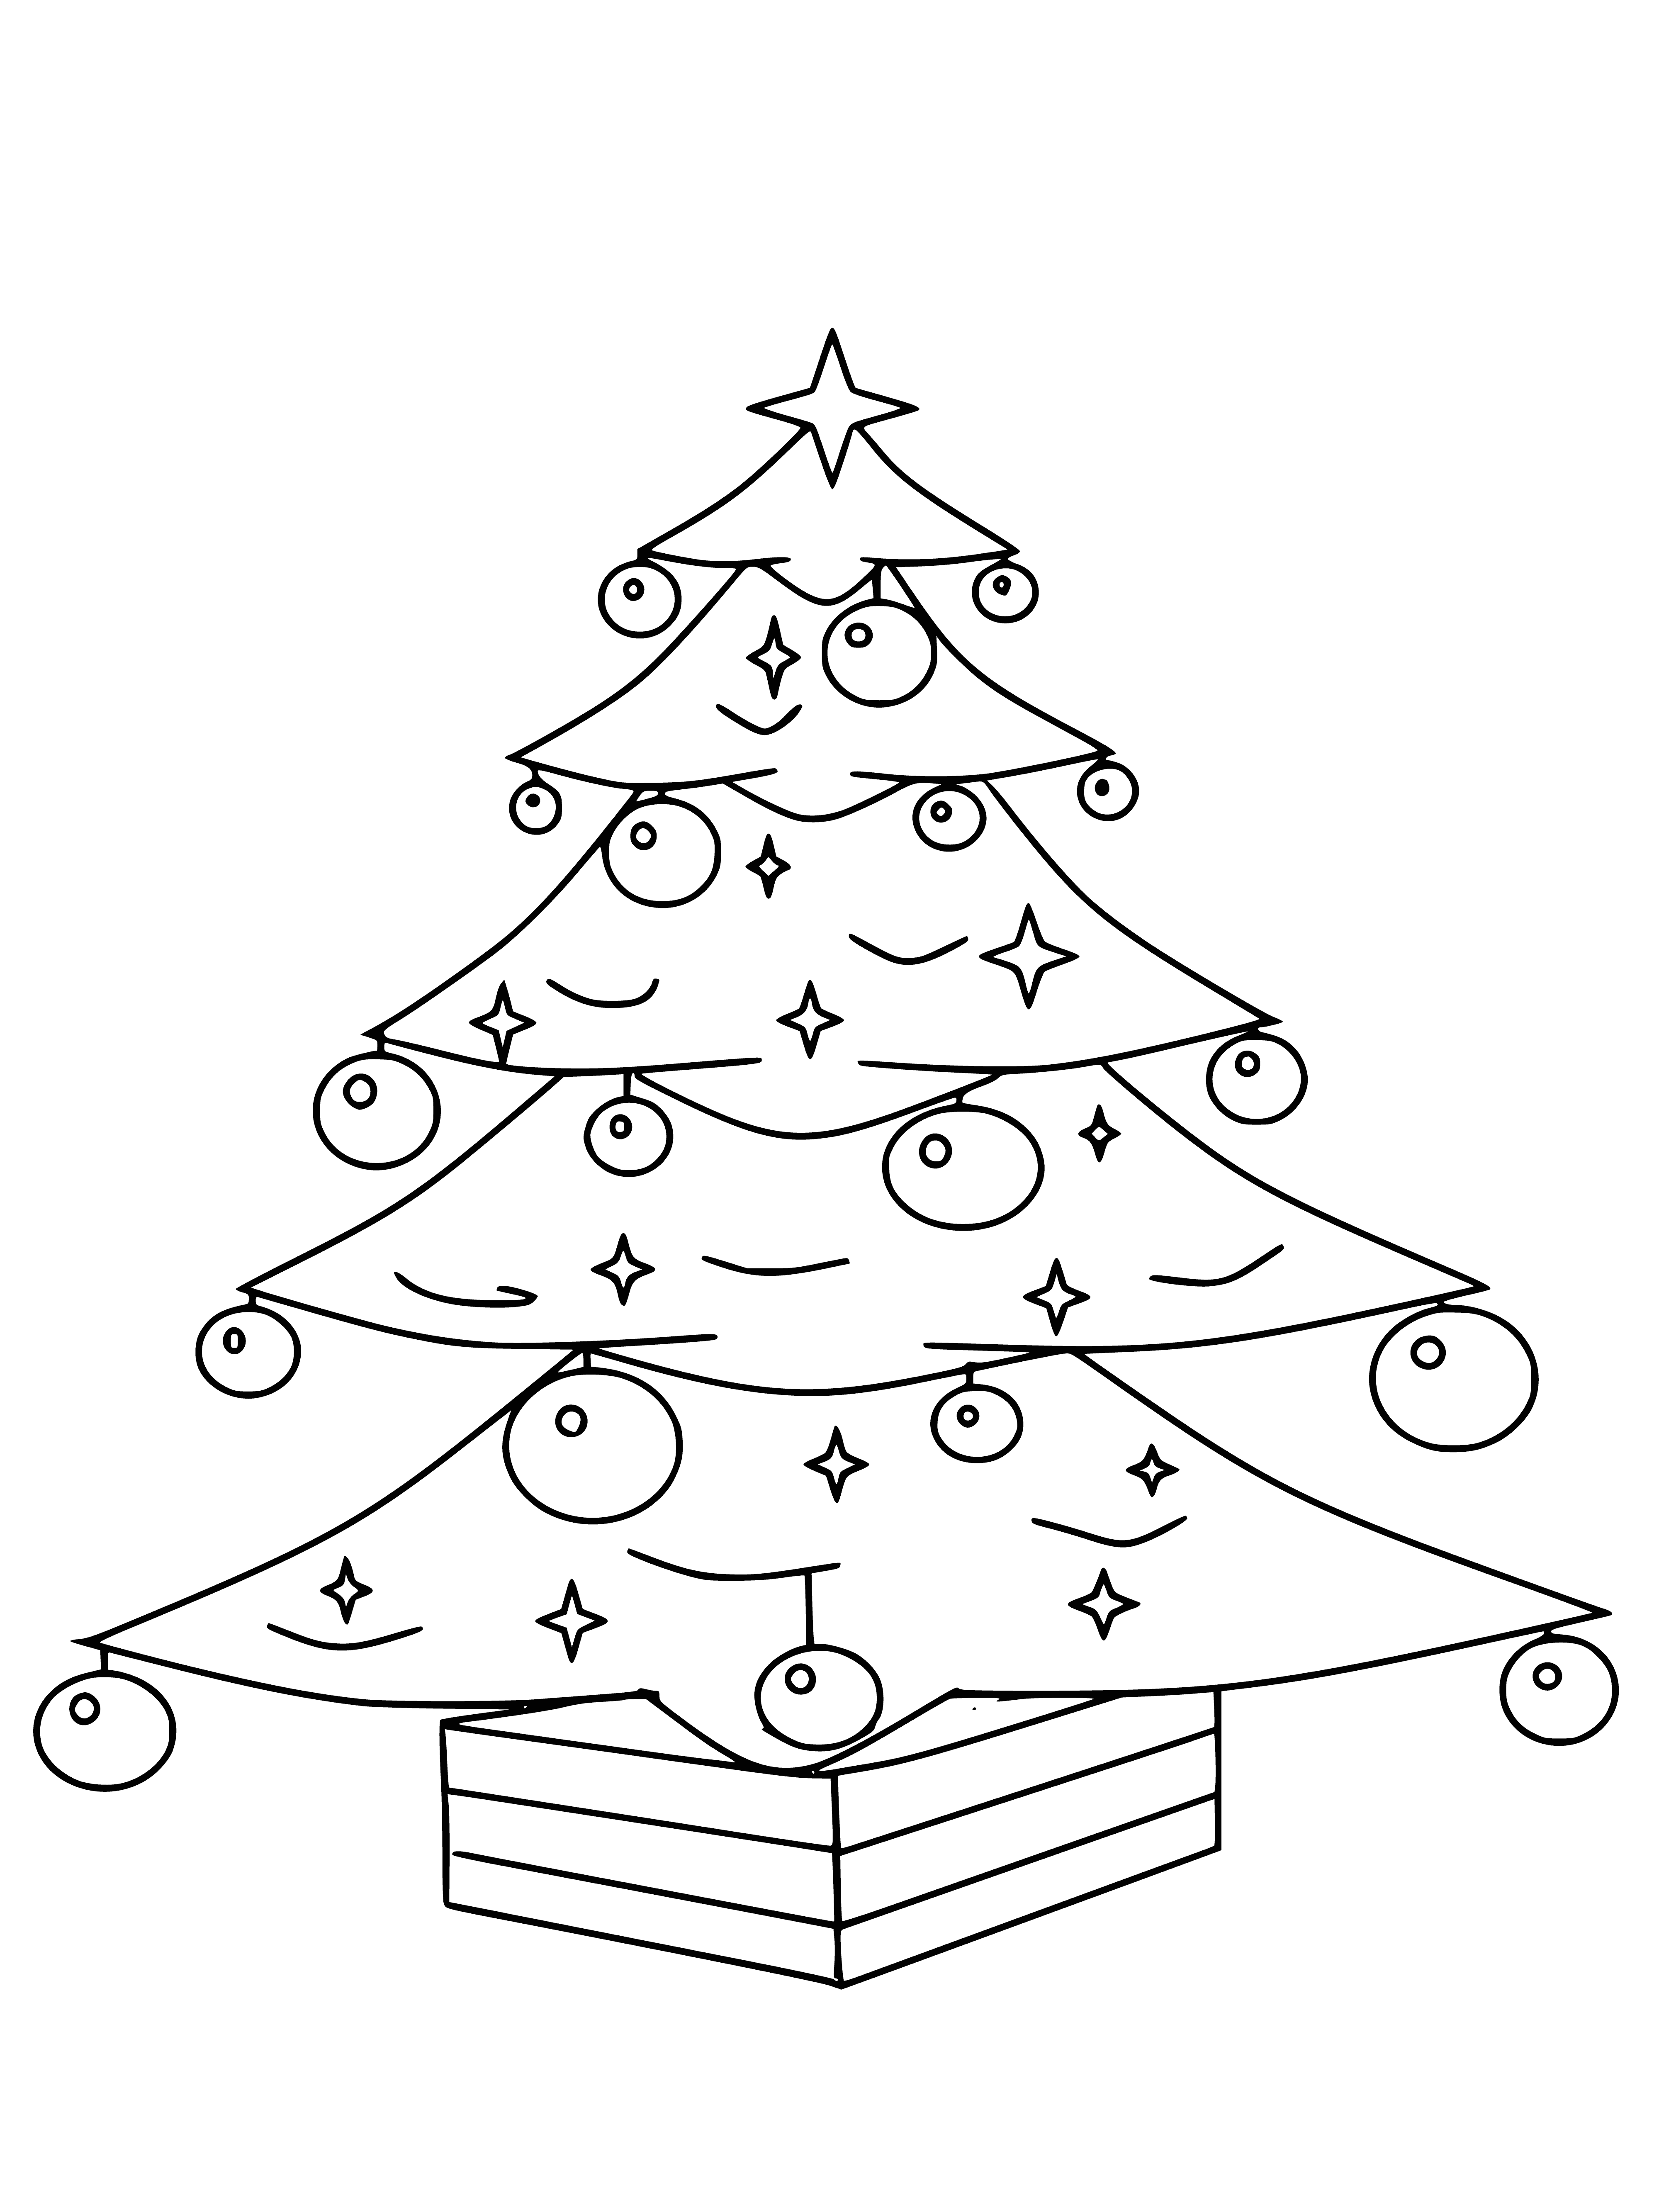 coloring page: Santa's at the tree delivering gifts: a teddy bear, doll, wagon, & more decorations like balls, ribbons, & a star.